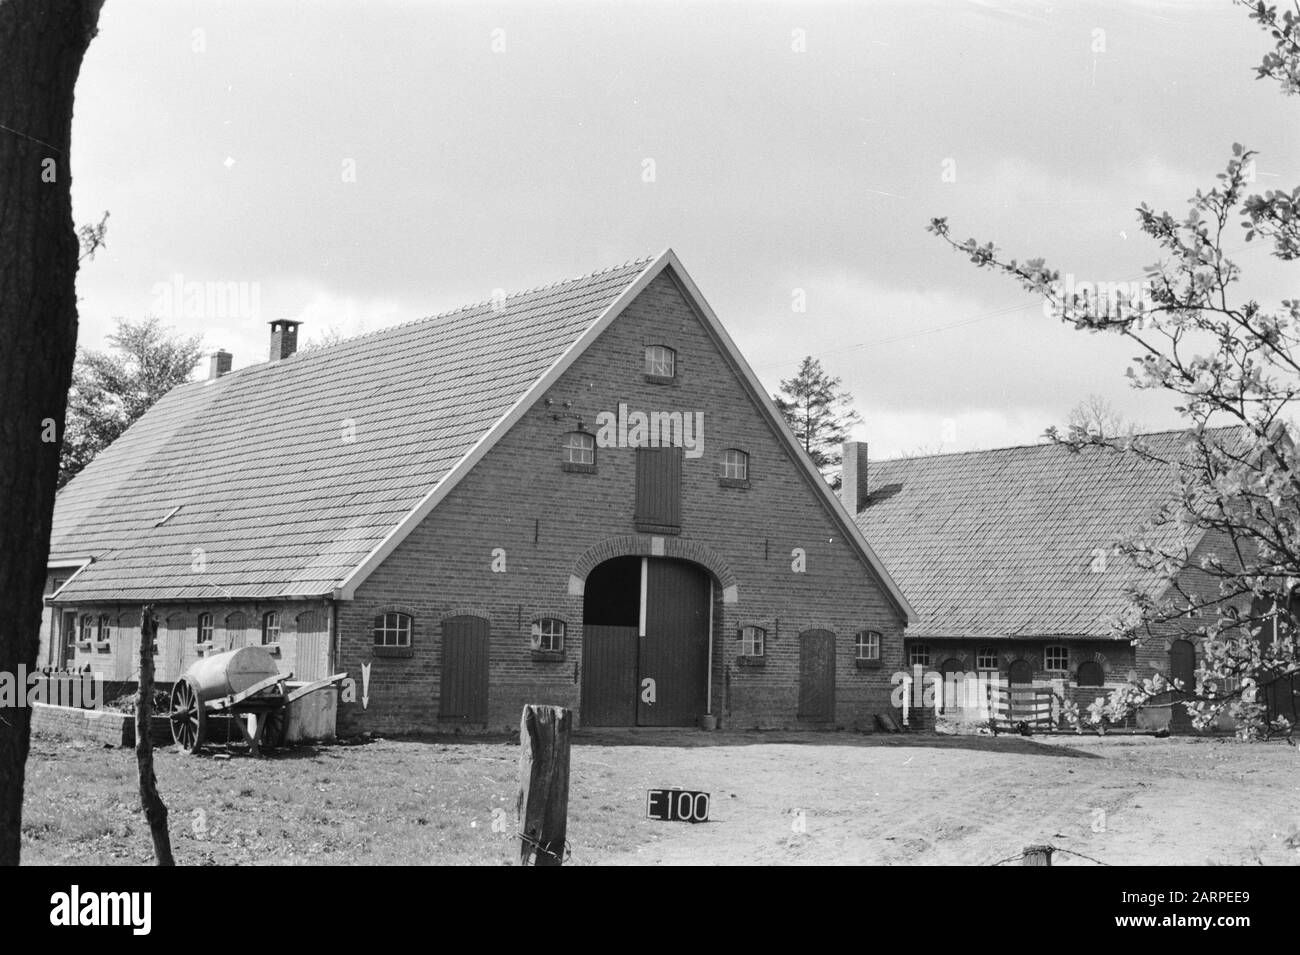 Fixed Points Cultural Service Barn in Eibergen (Land Division Racks) Annotation: E-100 Arrow points to Date: 1955 Location: Eibergen Parole Chiave: Land Division , Field Watermodifications Foto Stock